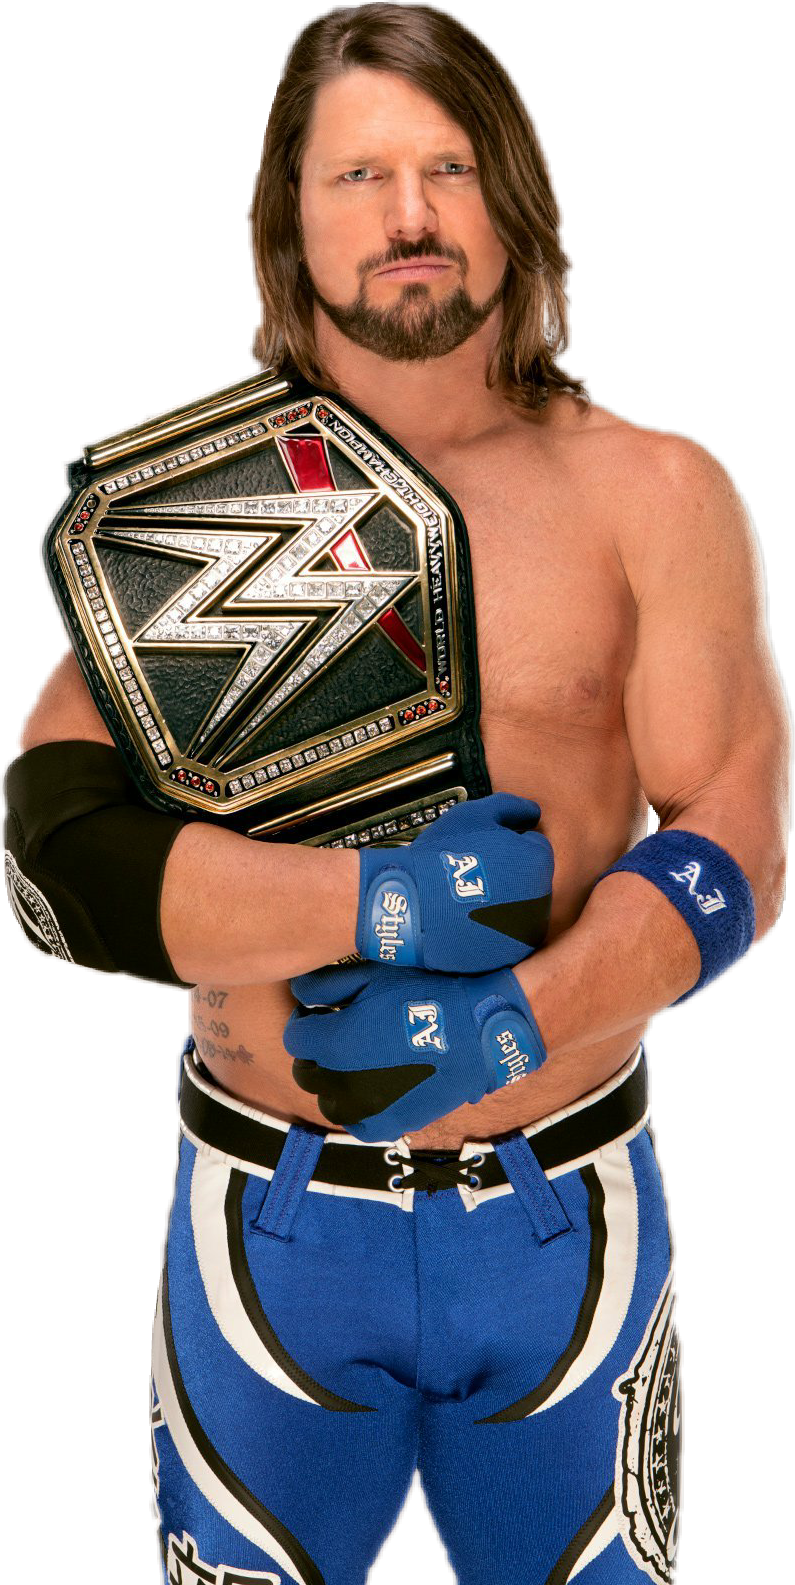 AJ Styles PNG Images HD